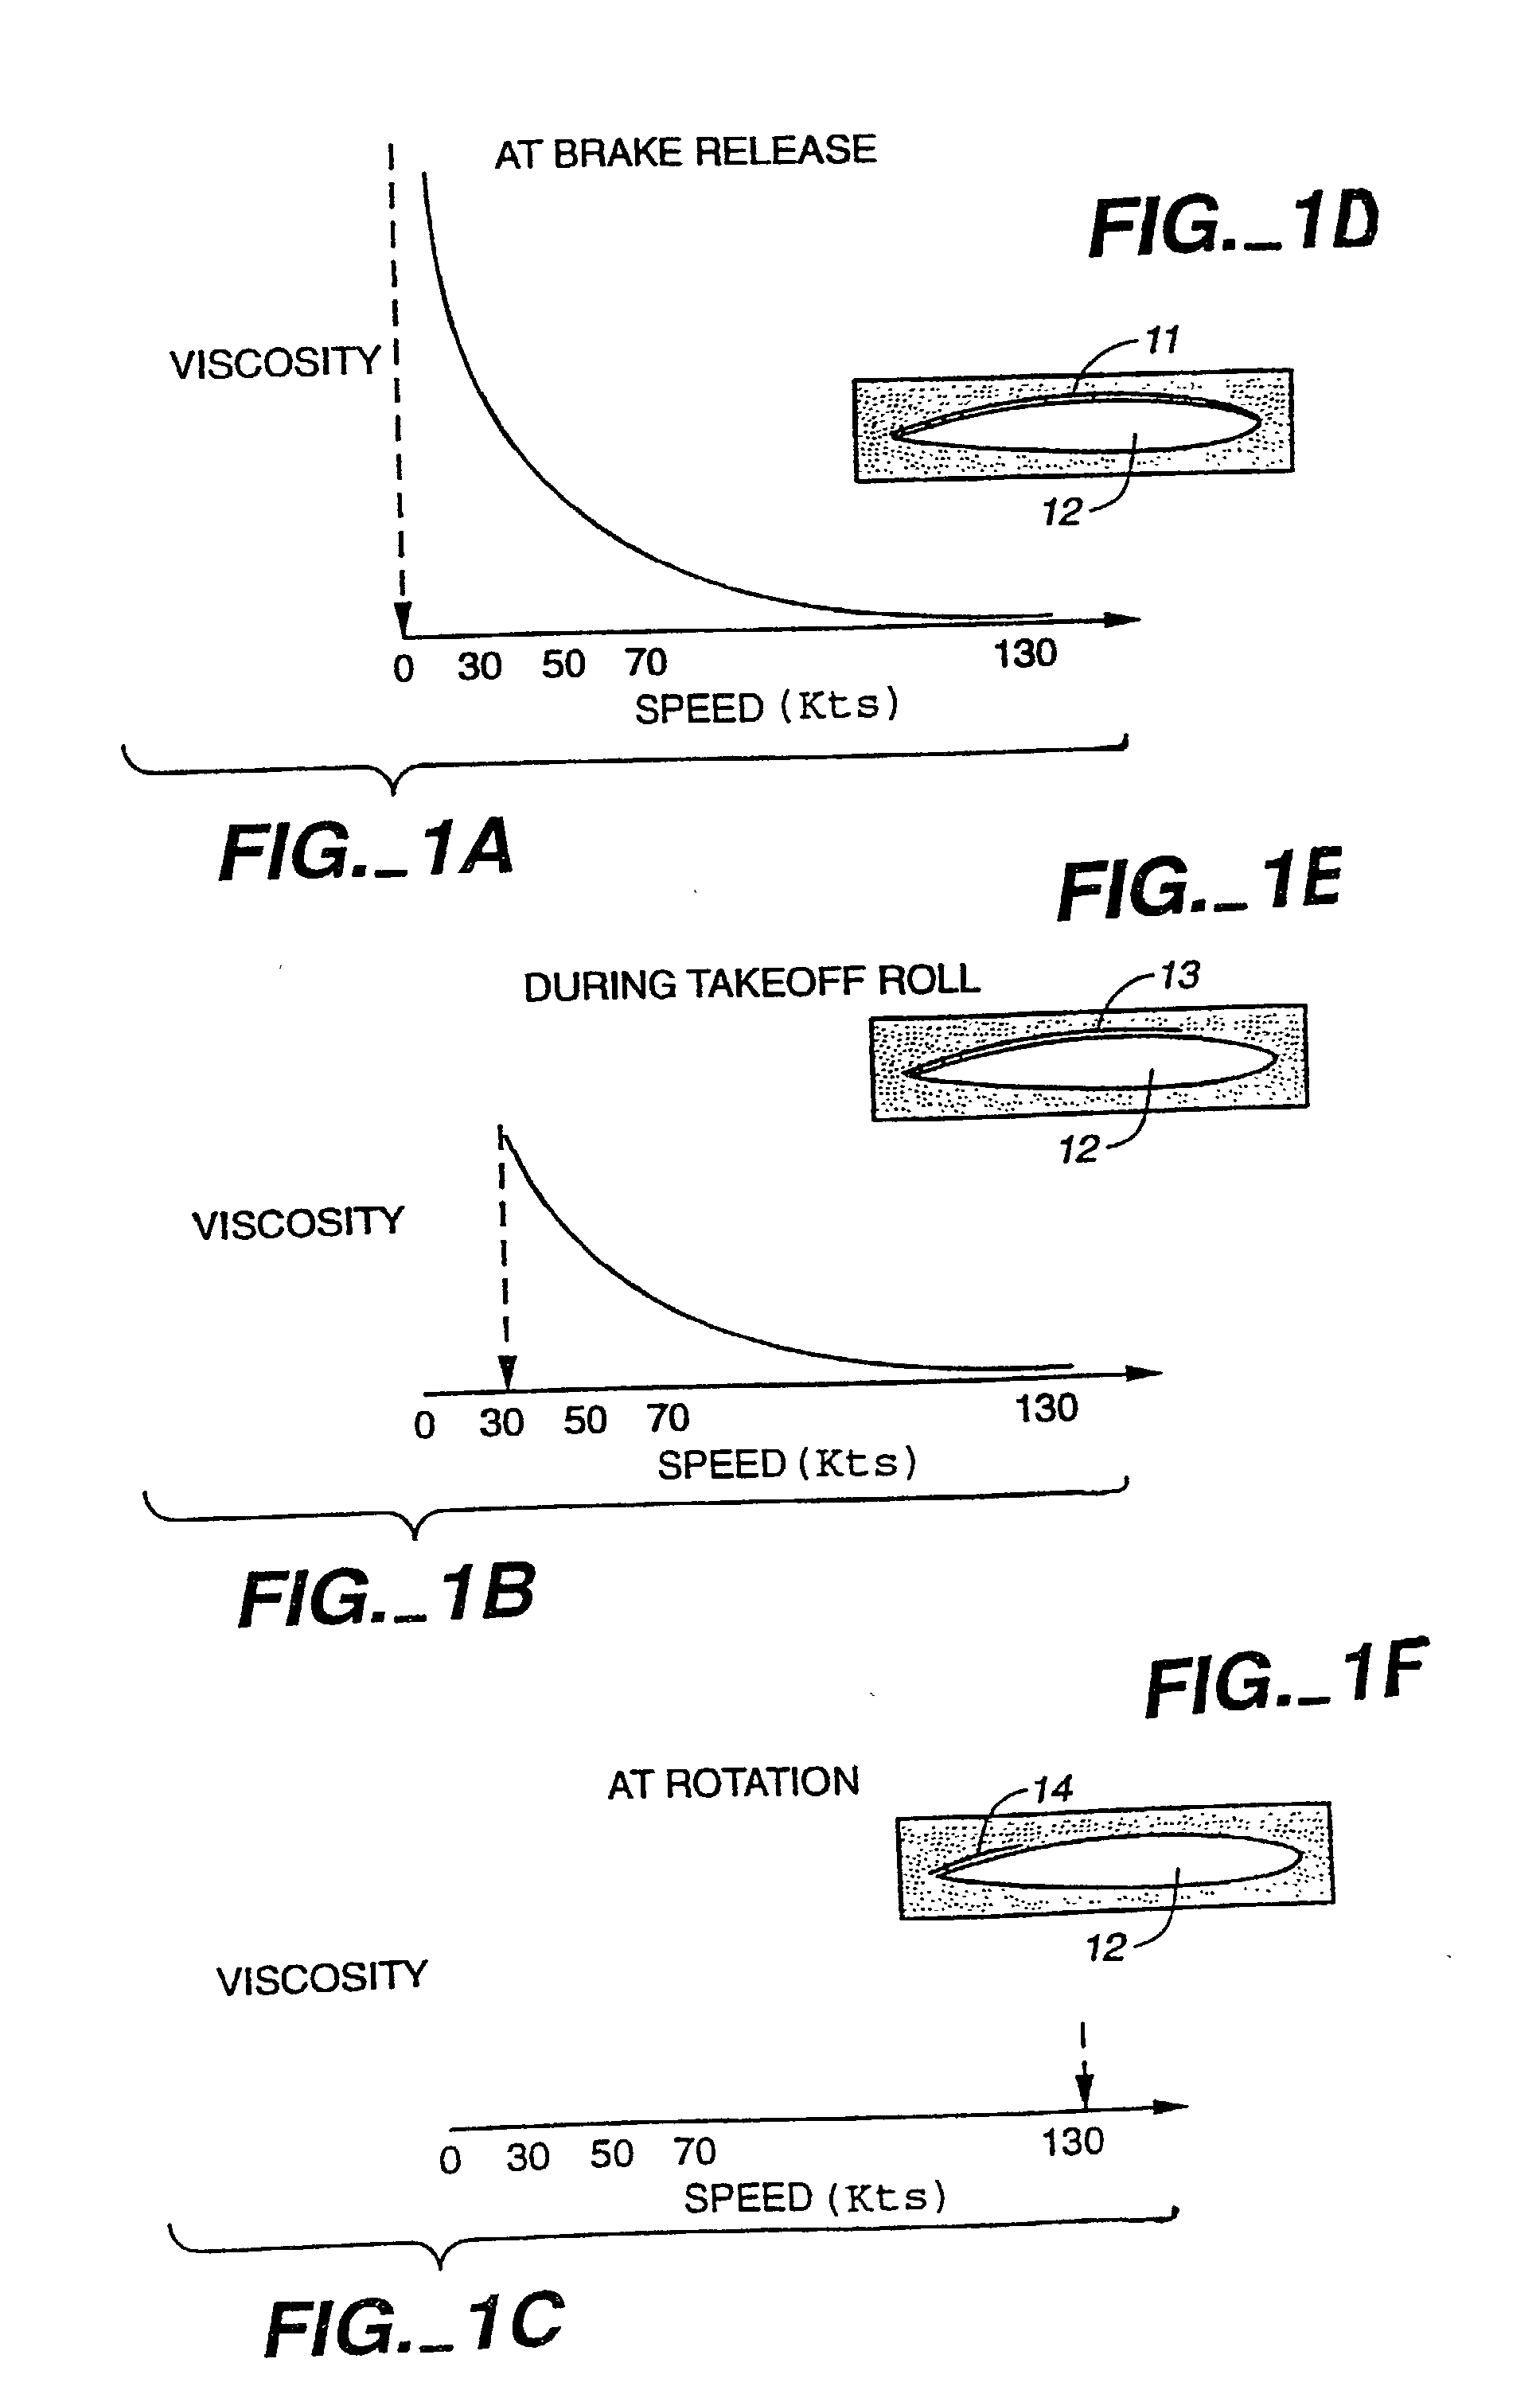 Environmentally friendly compositions having anti-icing, deicing or graffiti prevention properties